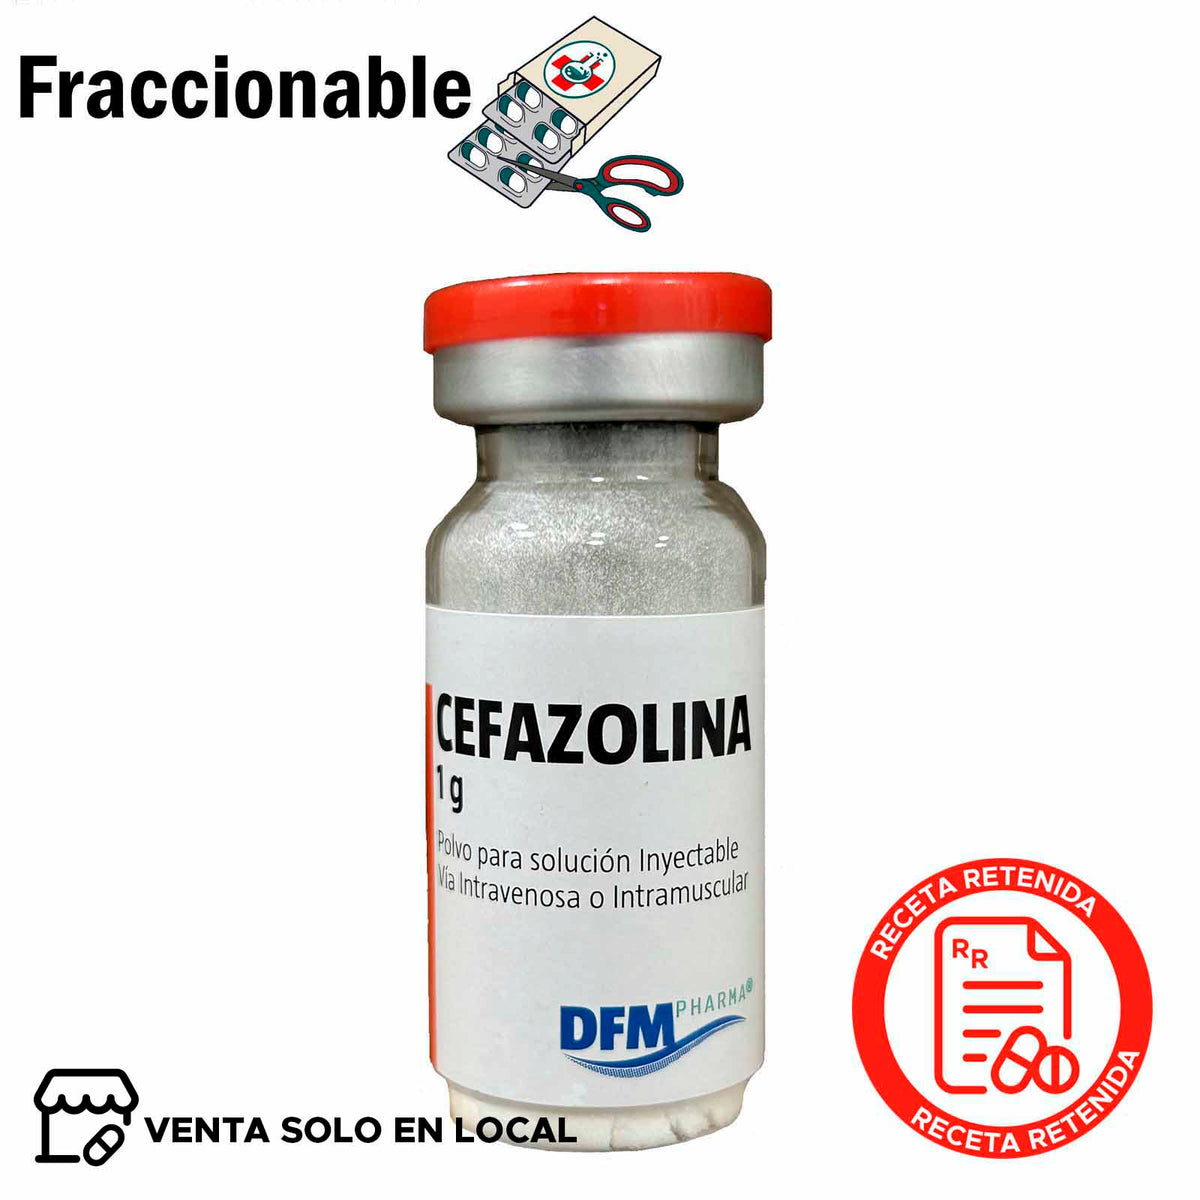 Cefazolina 1g Inyectable x 1 Ampolla